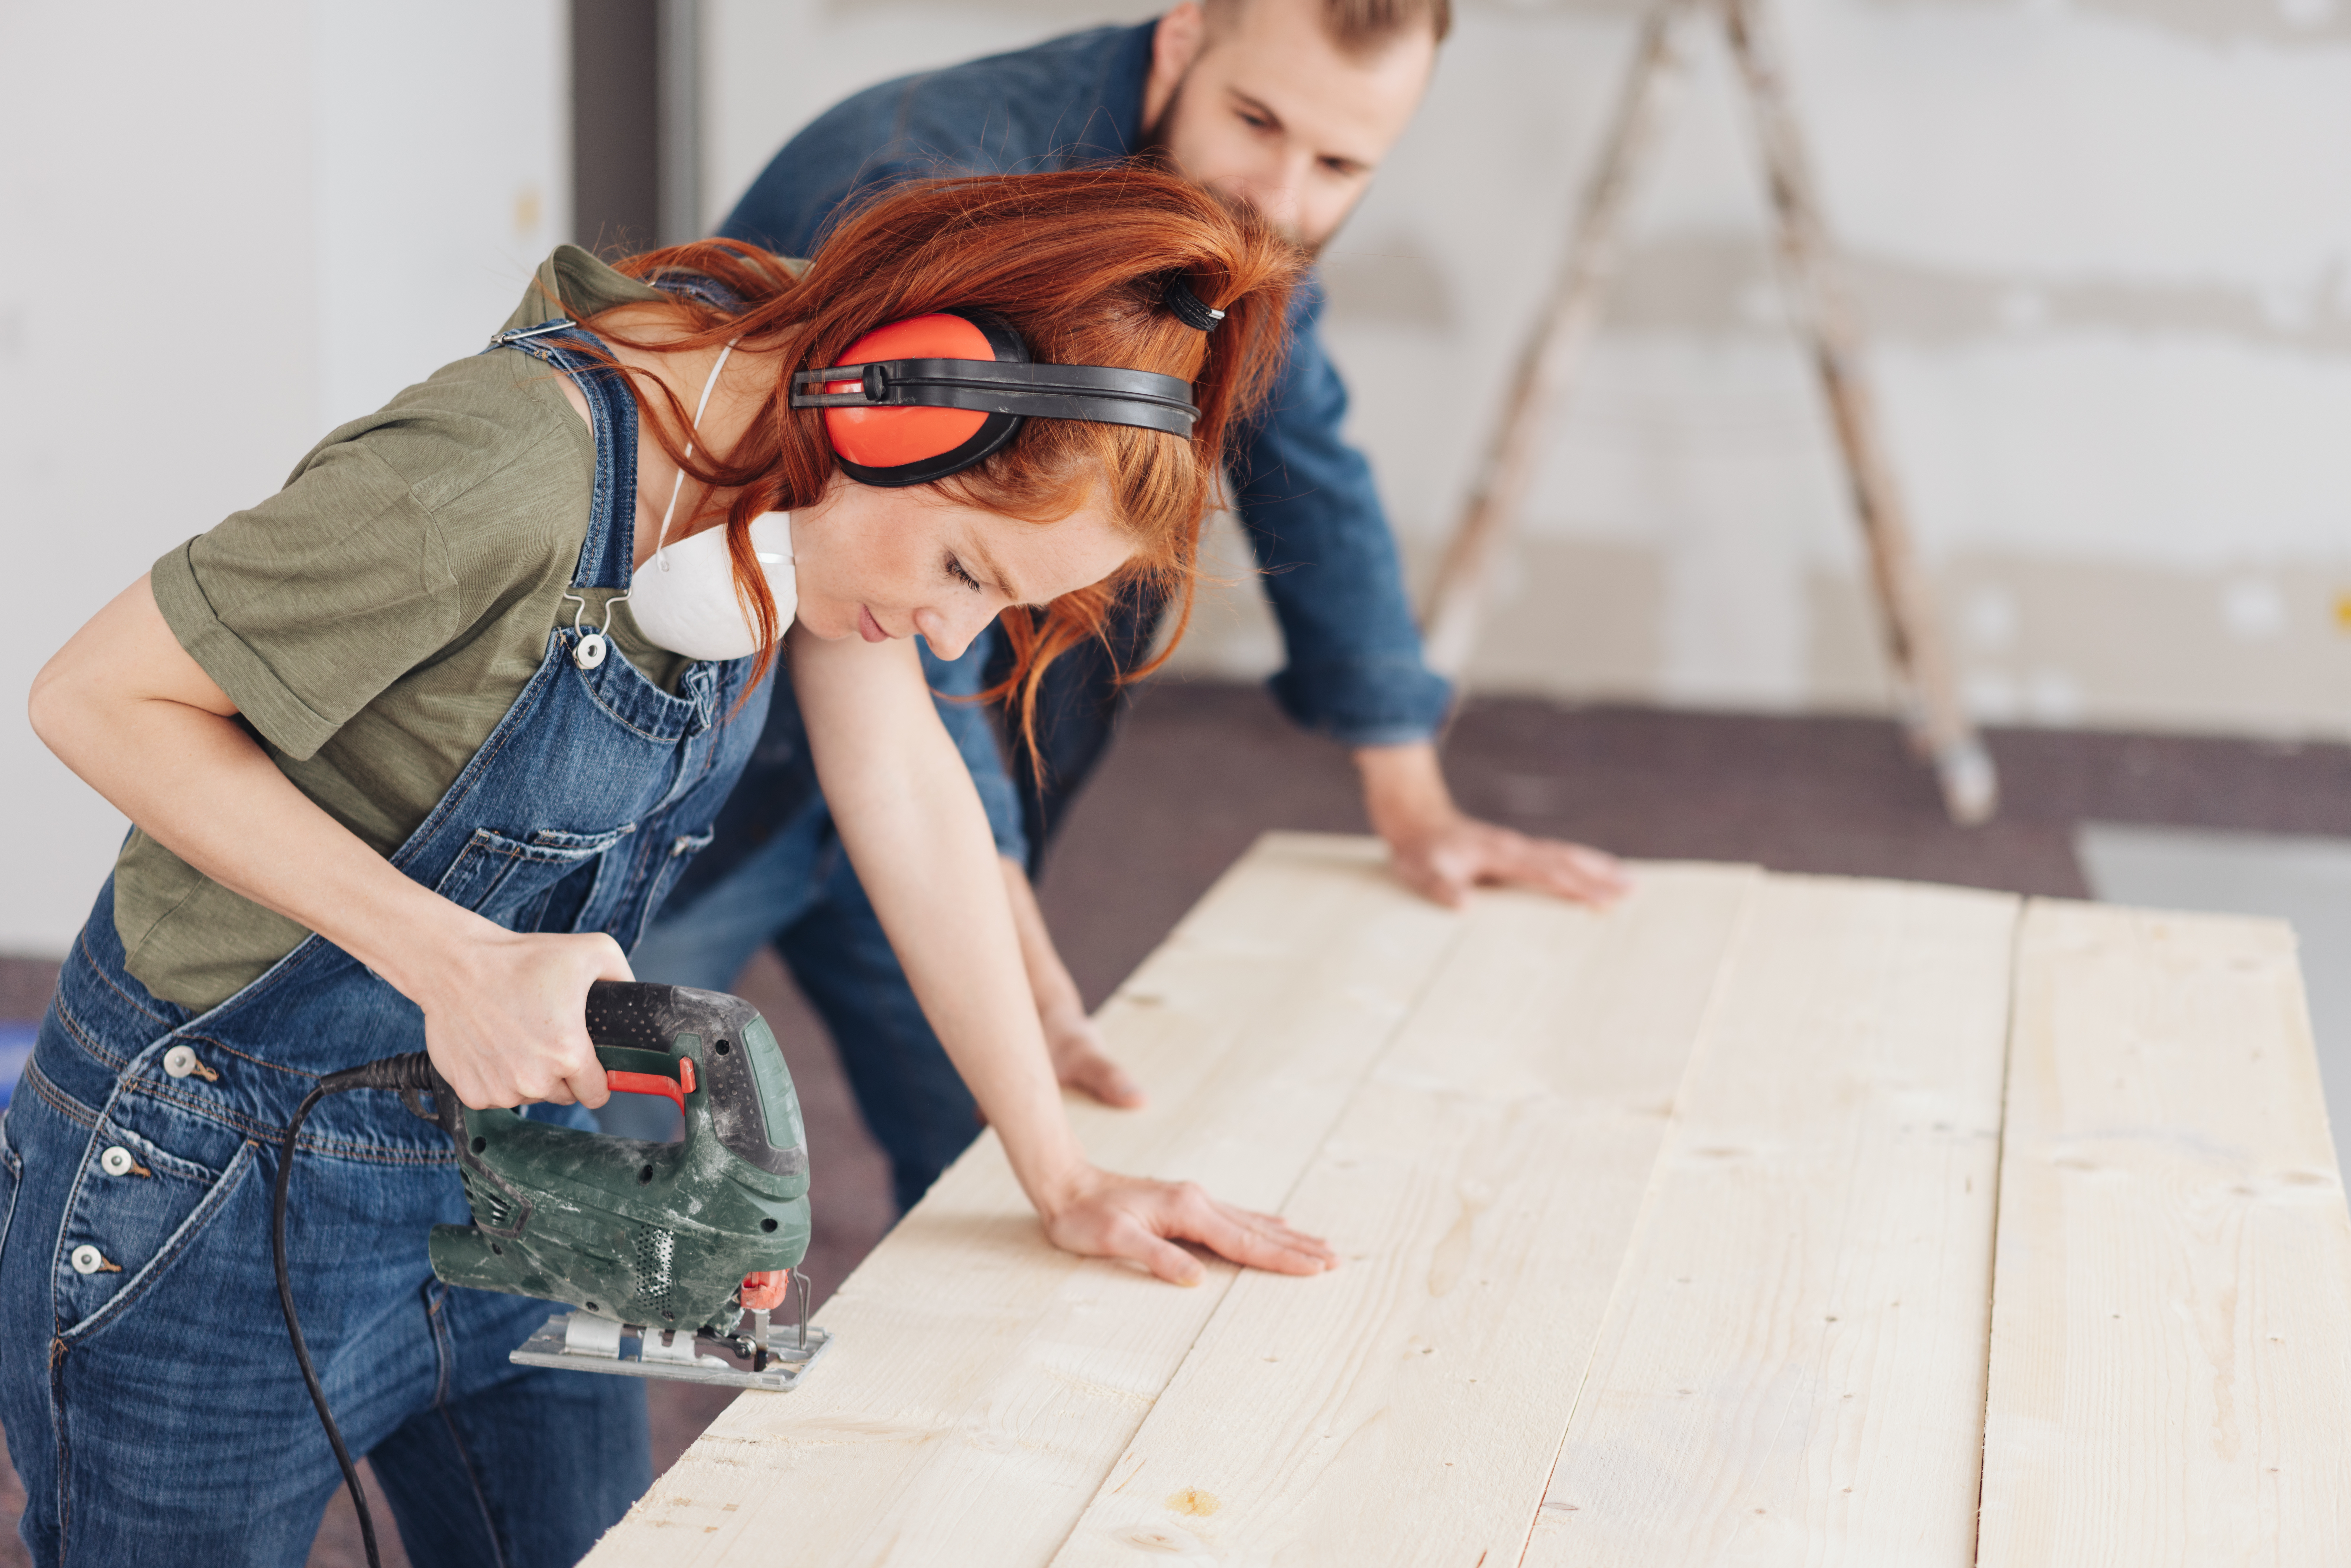 Four Tax Breaks for Home Improvements